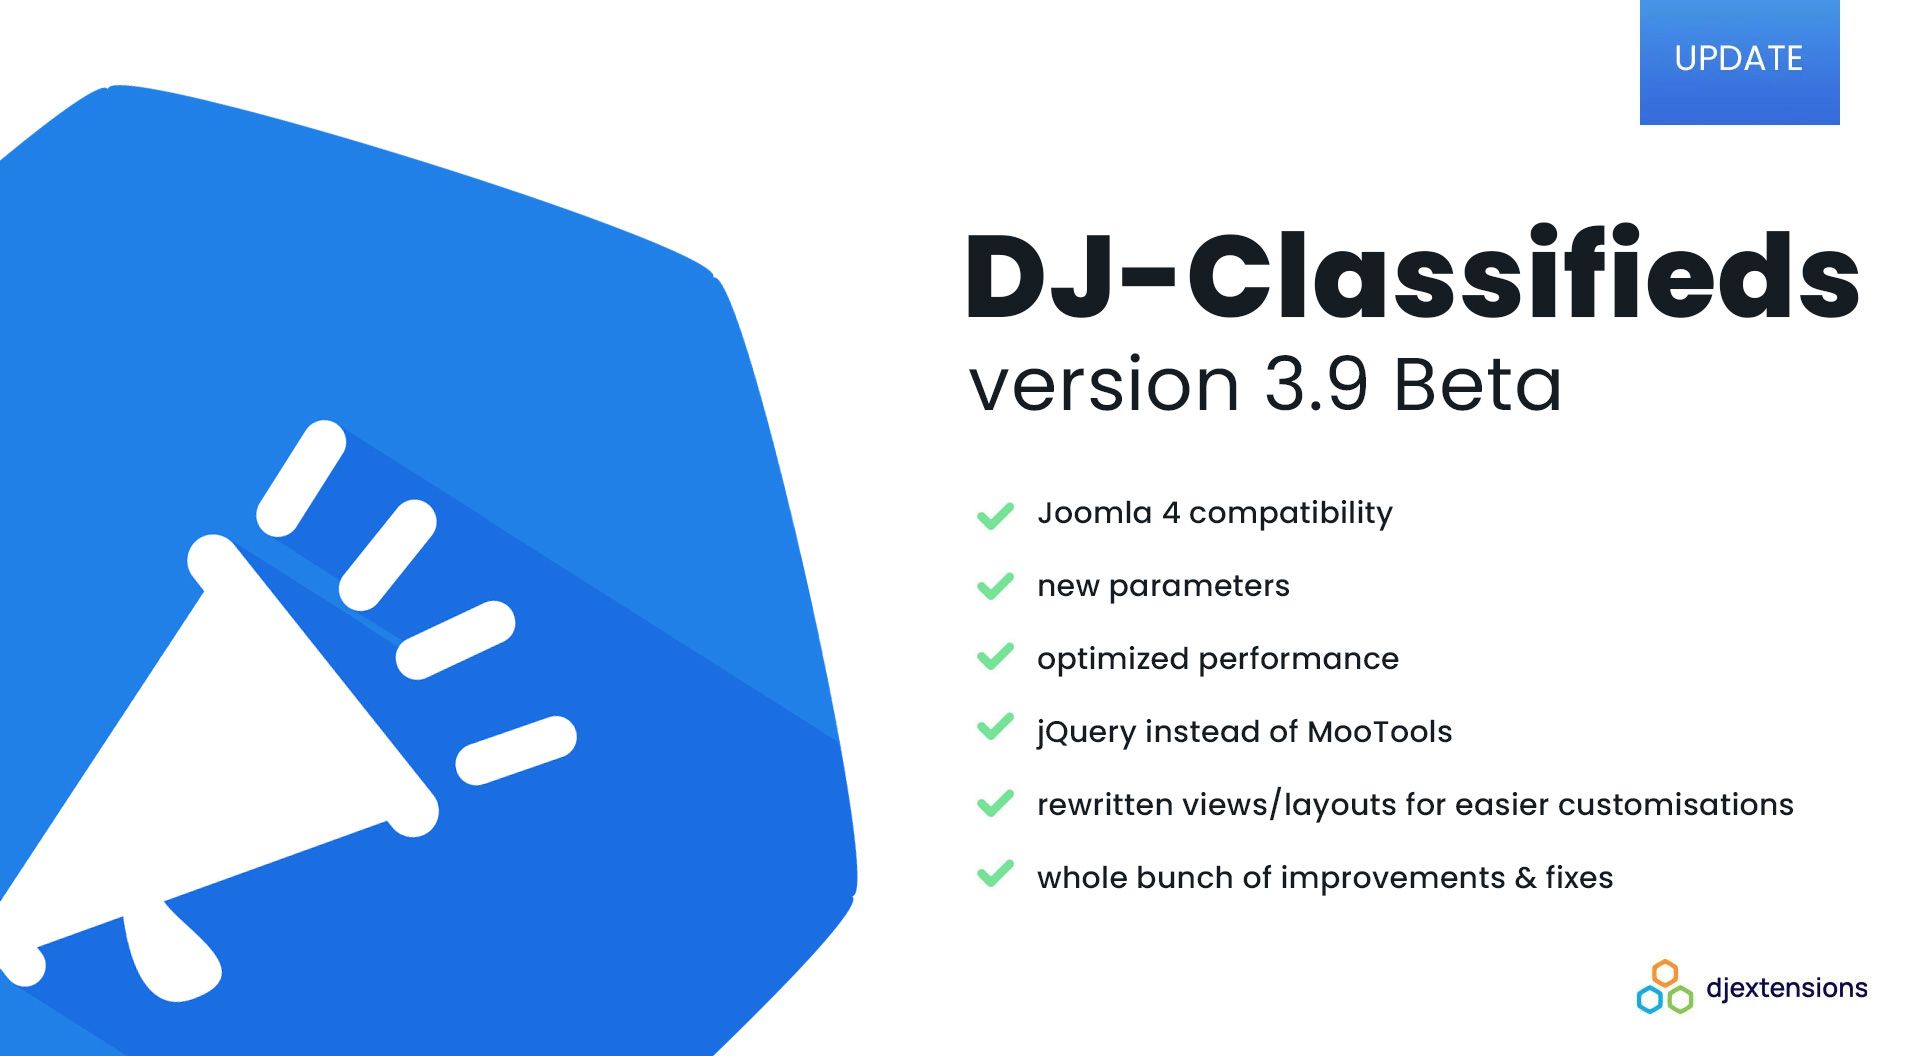 DJ-Classifieds version 3.9 beta brings the Joomla 4 support and a lot of changes